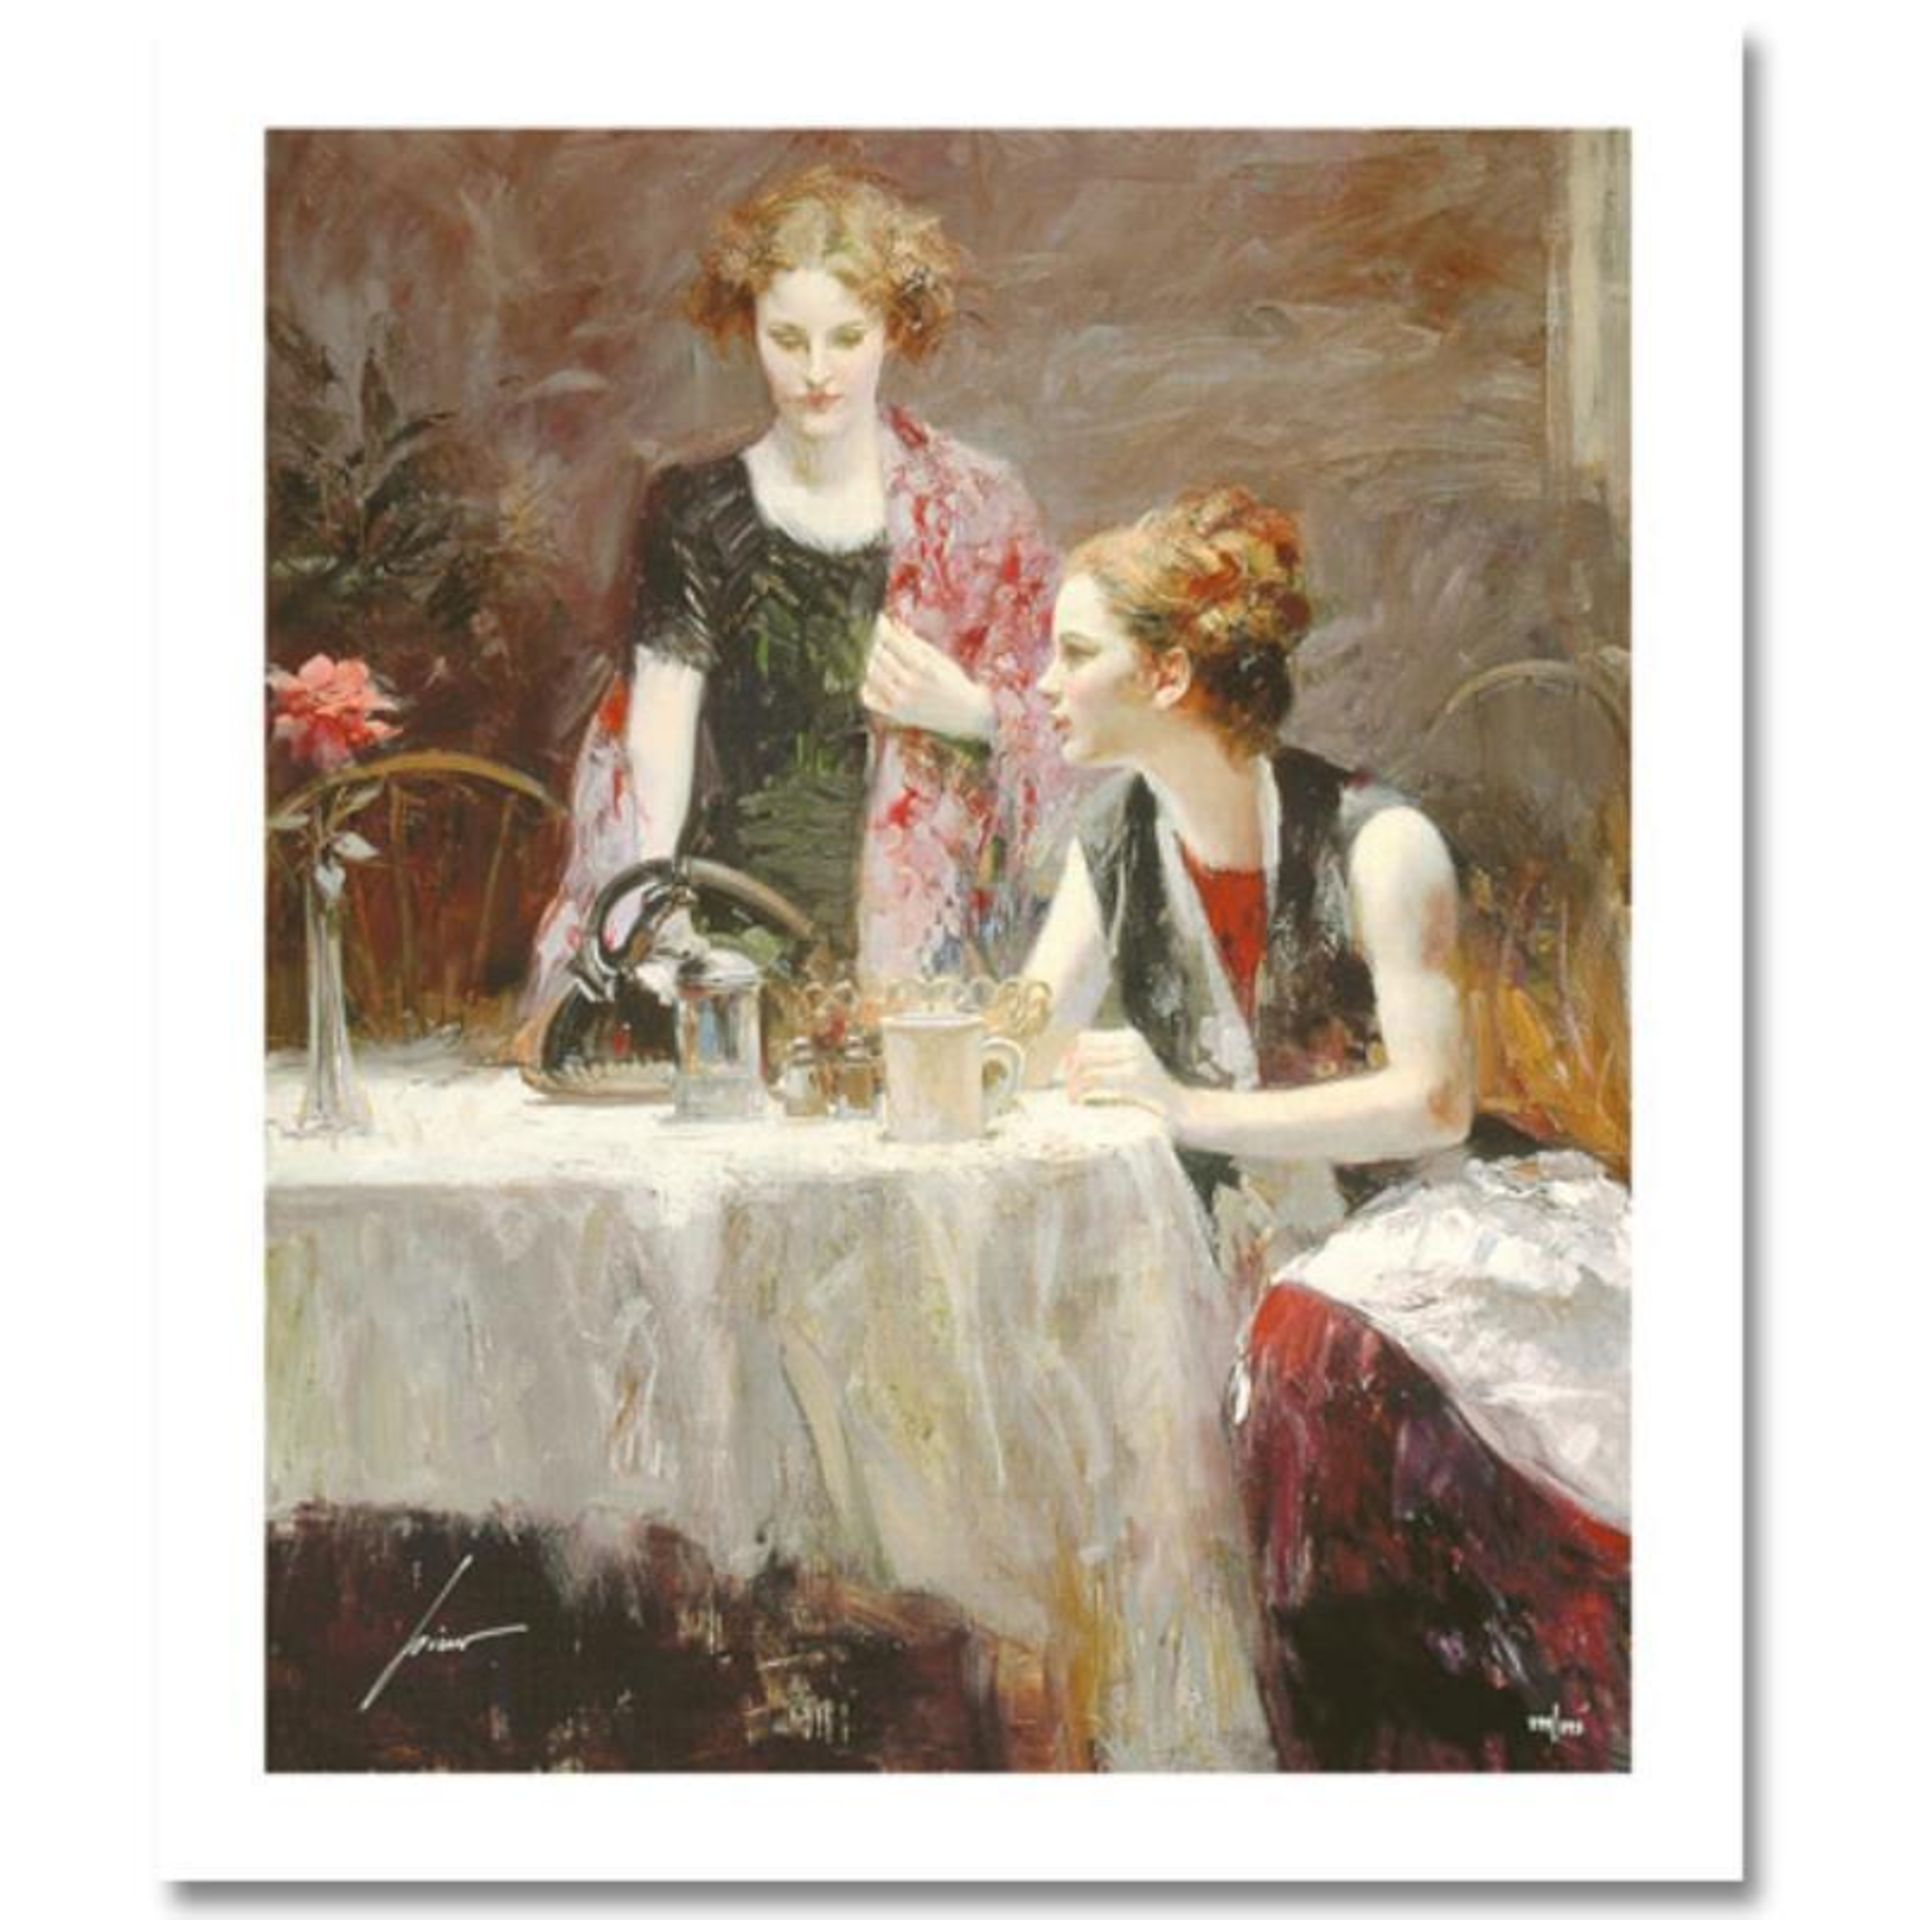 Pino (1939-2010) "After Dinner" Limited Edition Giclee. Numbered and Hand Signed